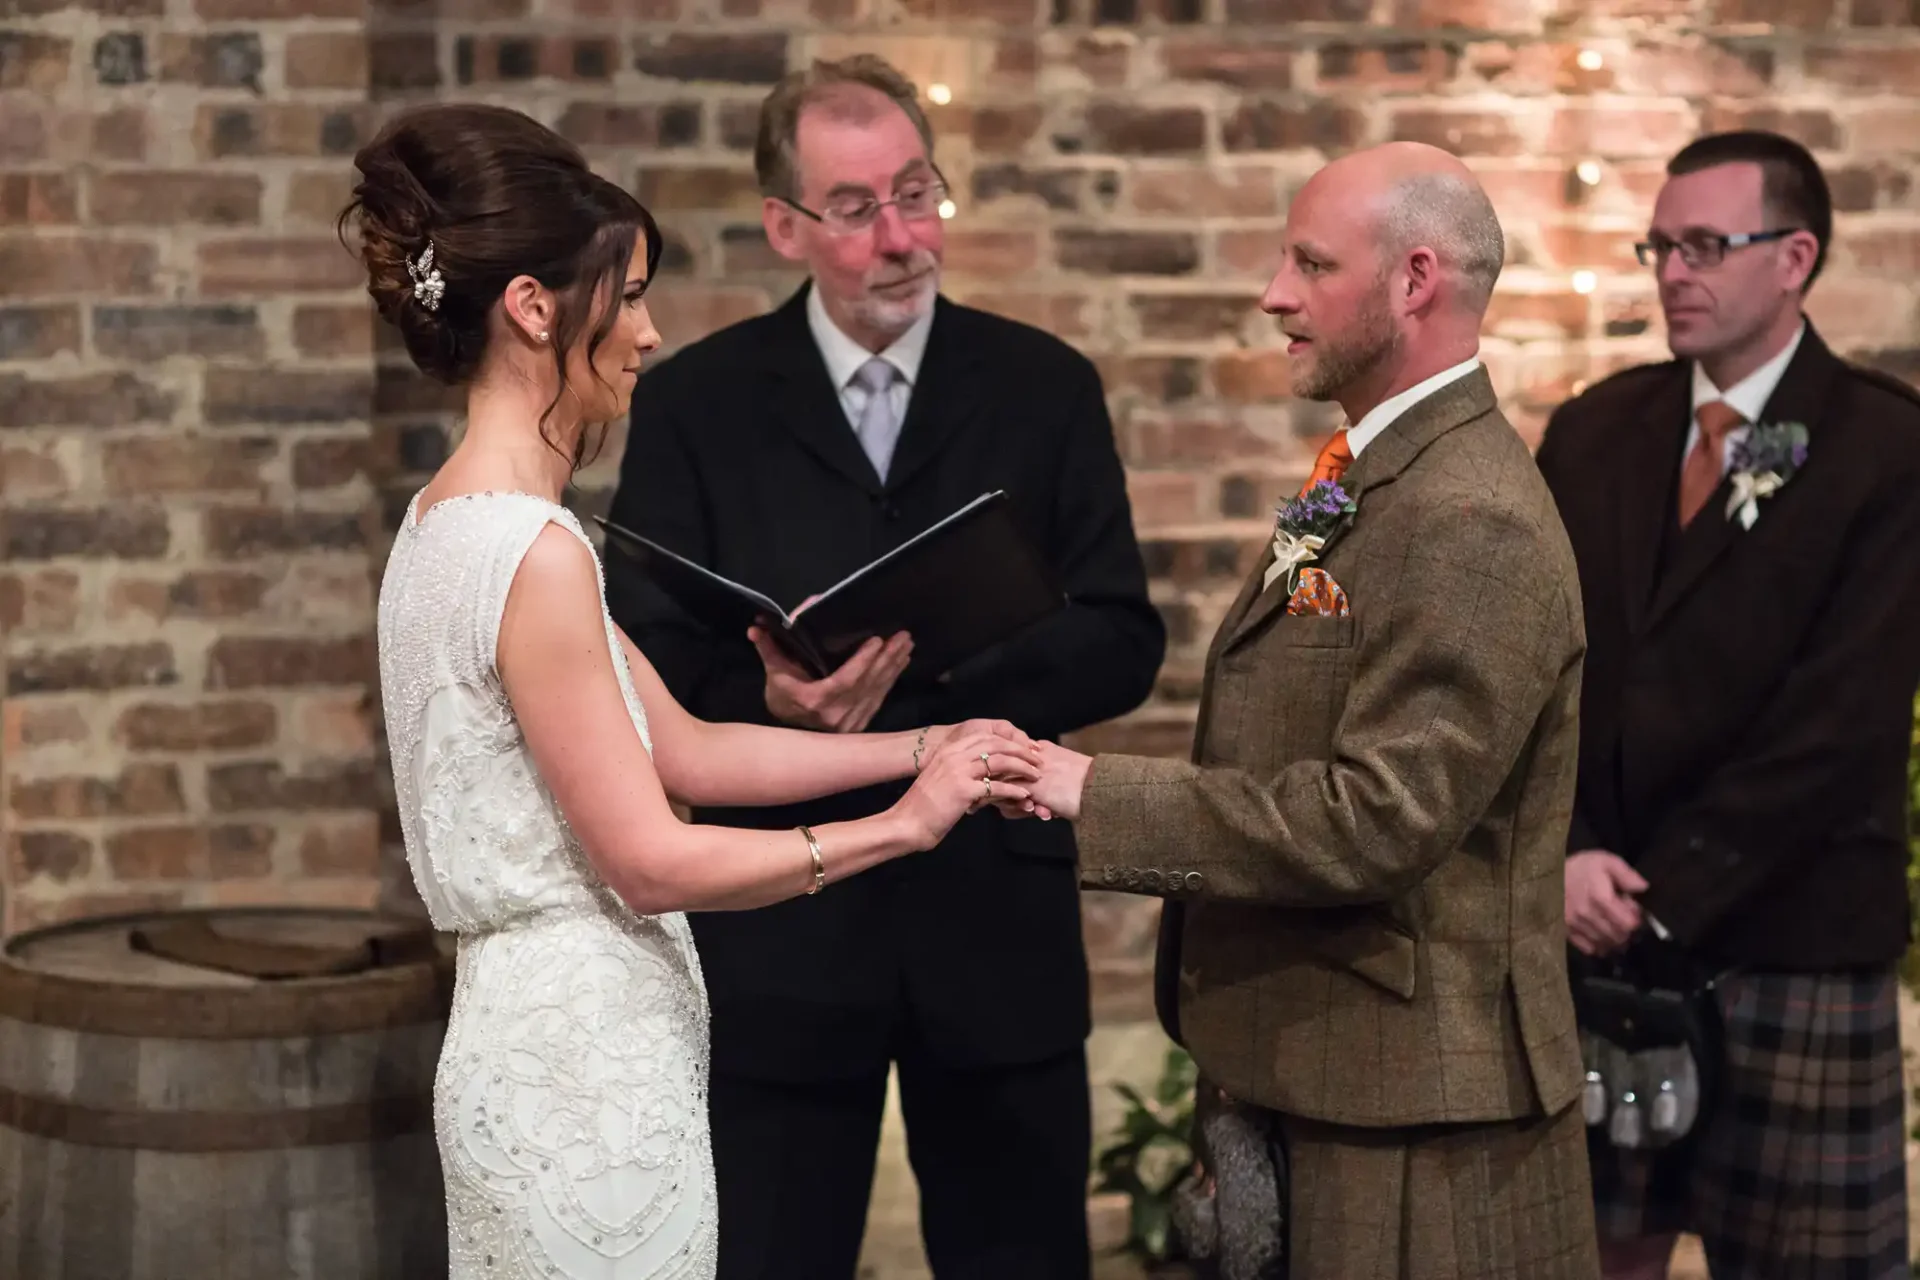 A bride and groom exchange vows, holding hands in front of an officiant at an indoor wedding ceremony with guests in the background.